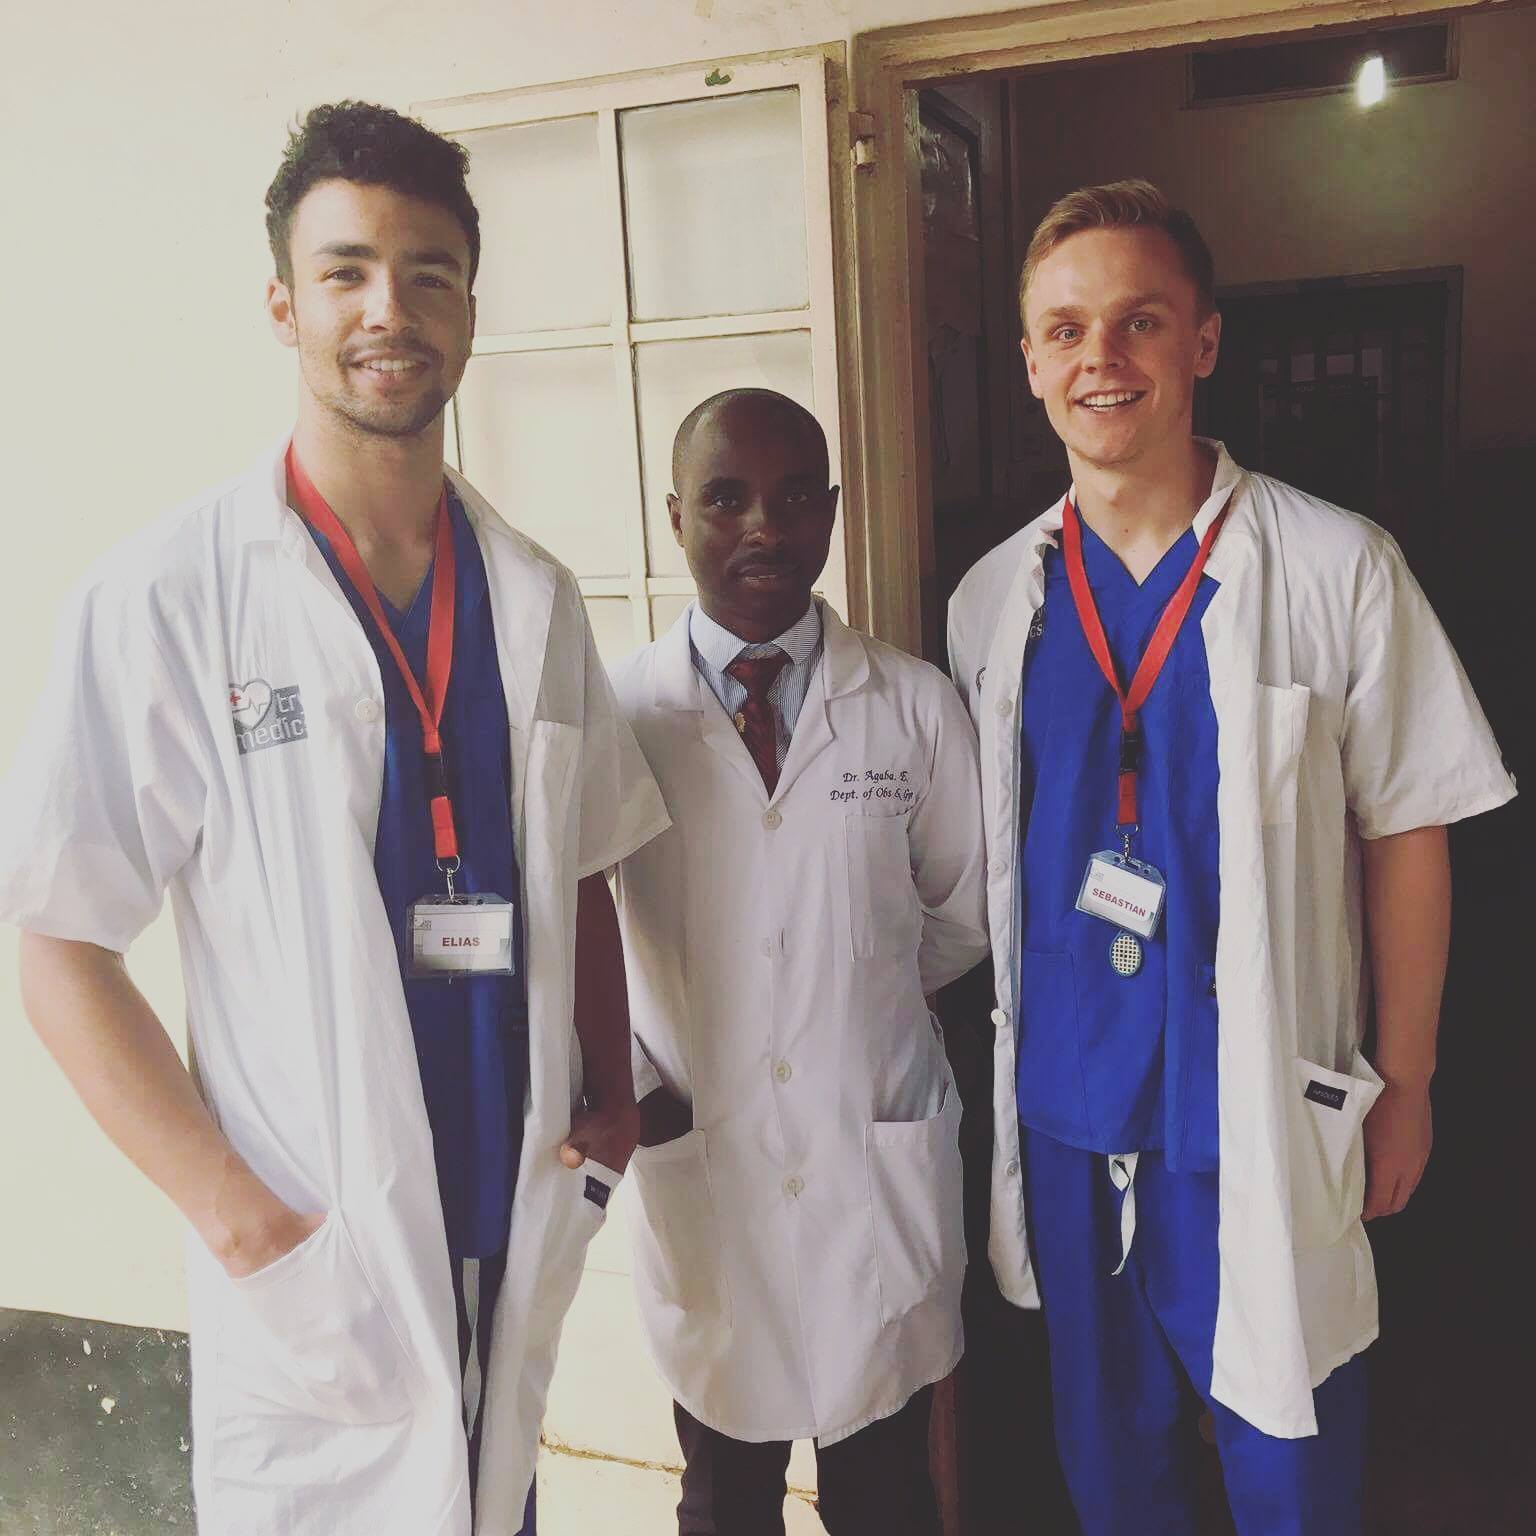 About the stay - Try Medics hospital internship abroad